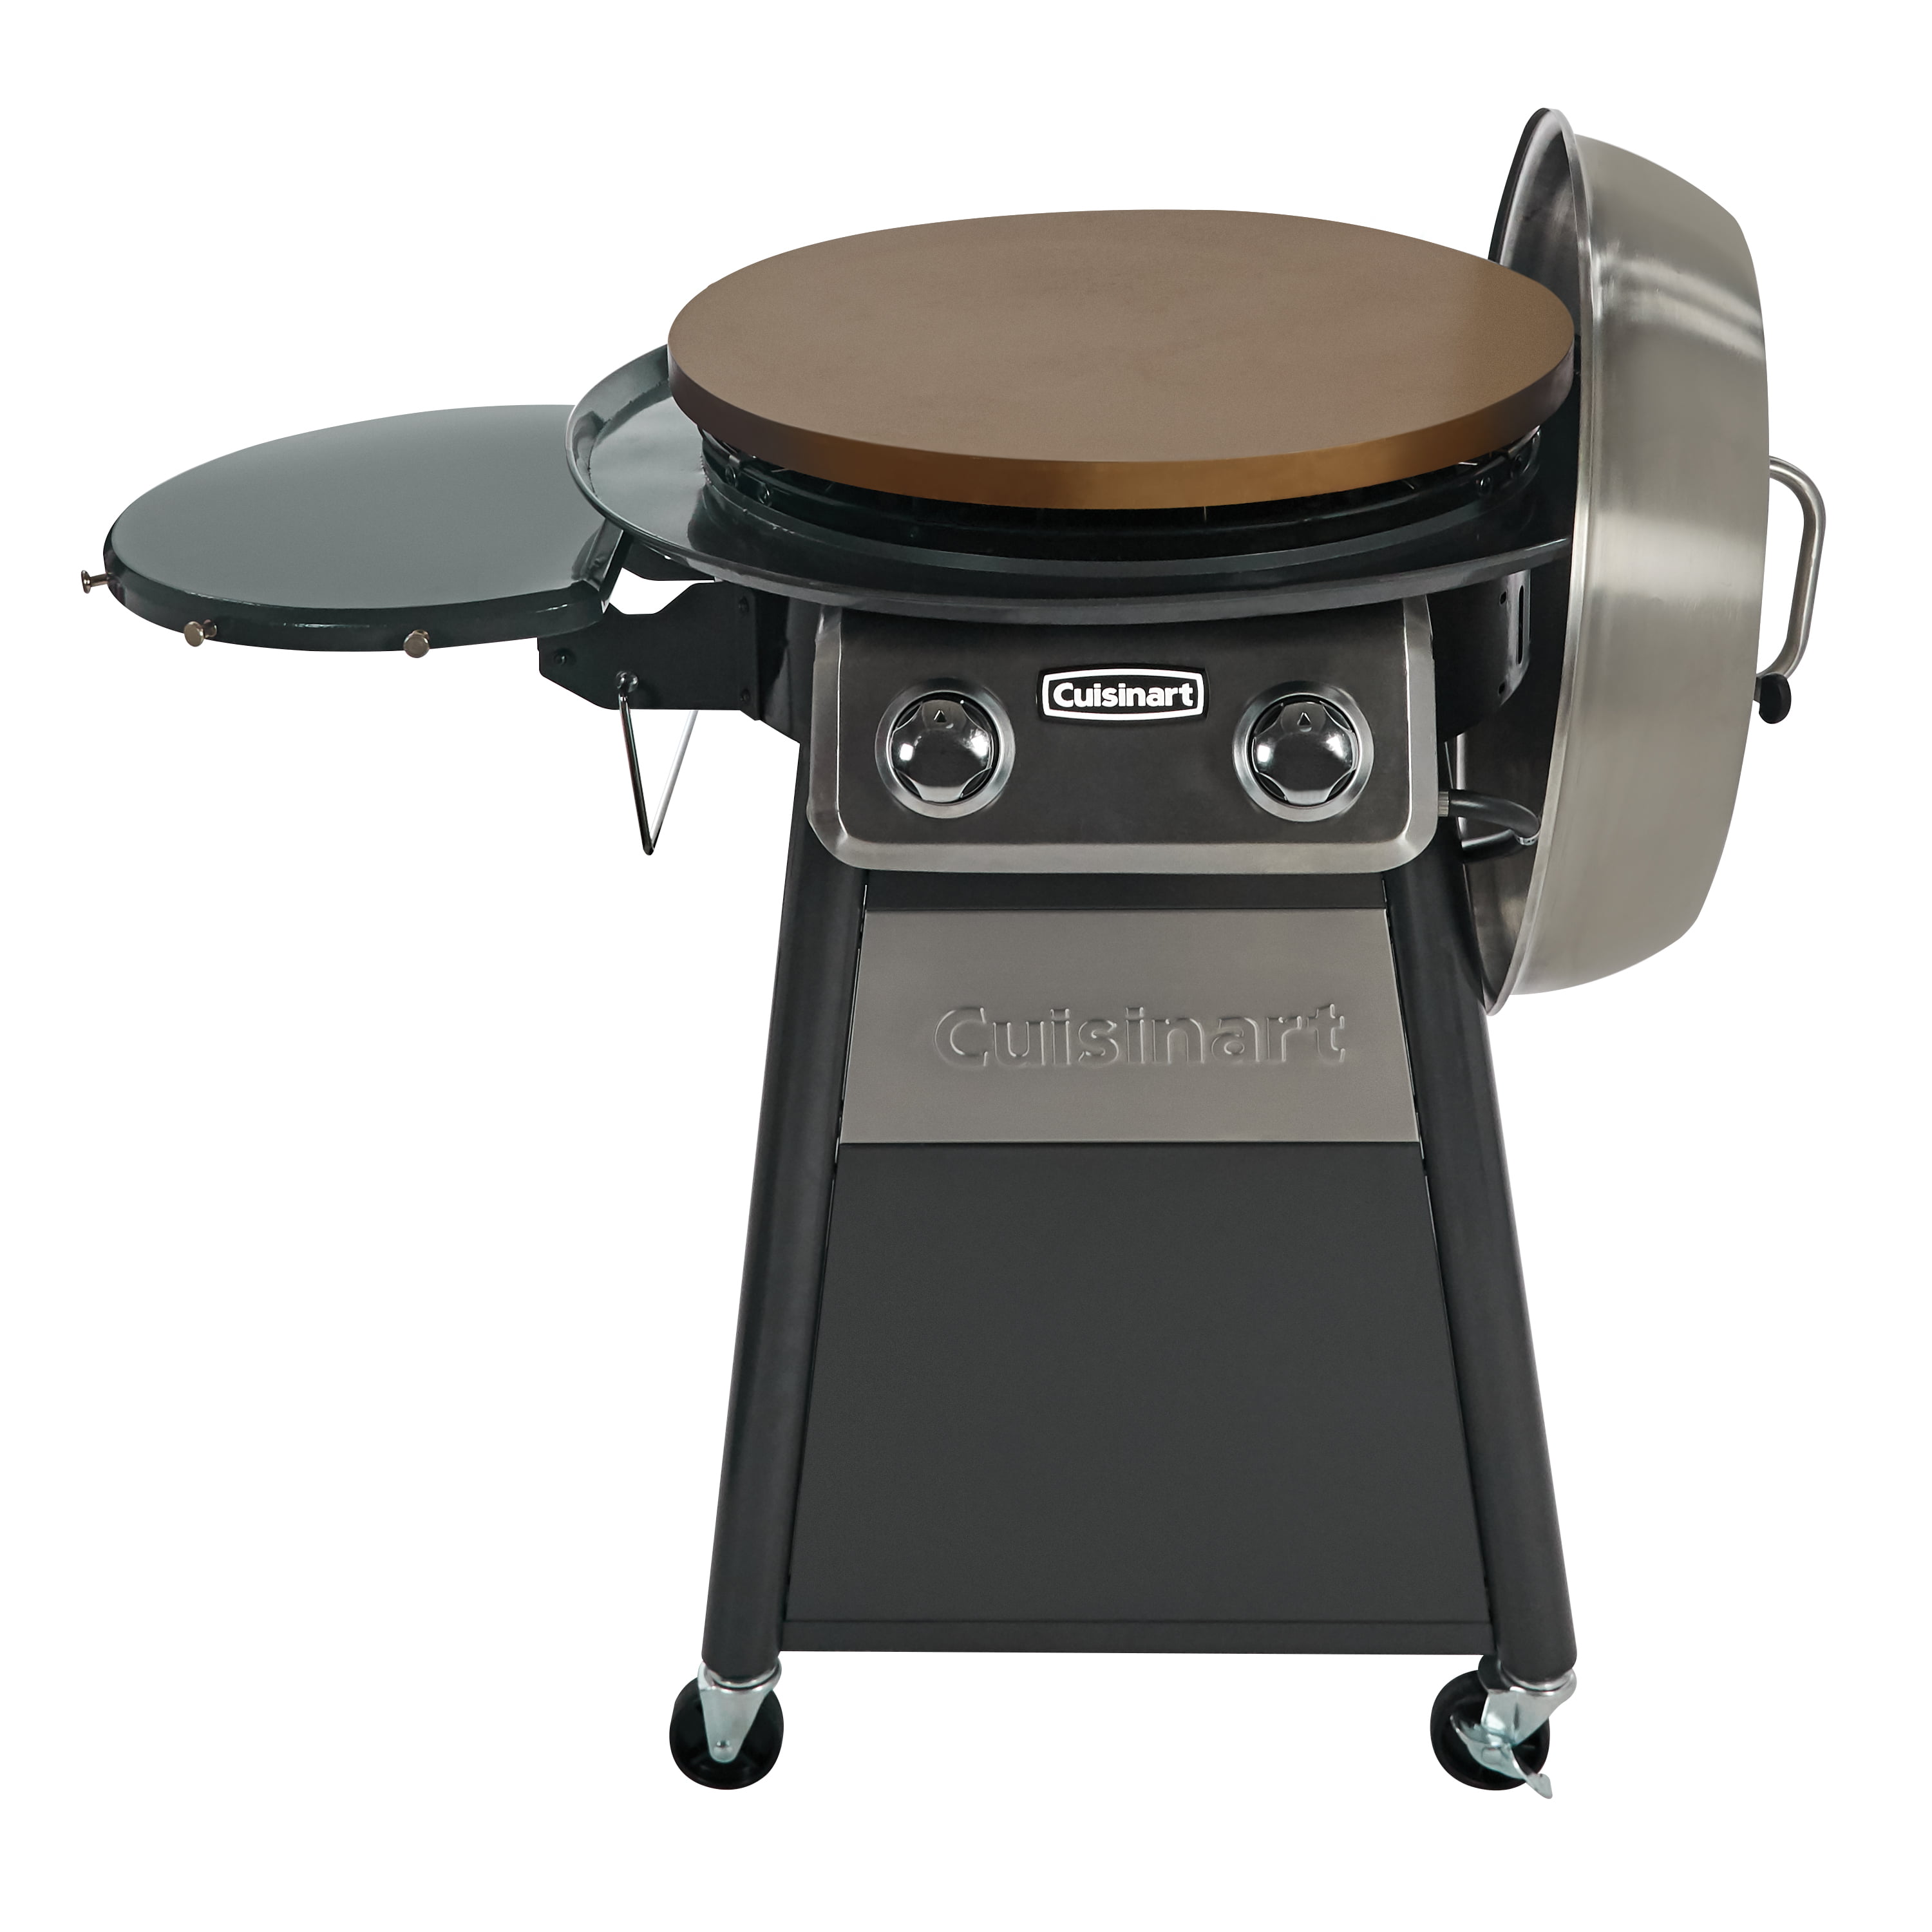 Cuisinart 360 Griddle Cooking Center, Large Round Flat Top Grill